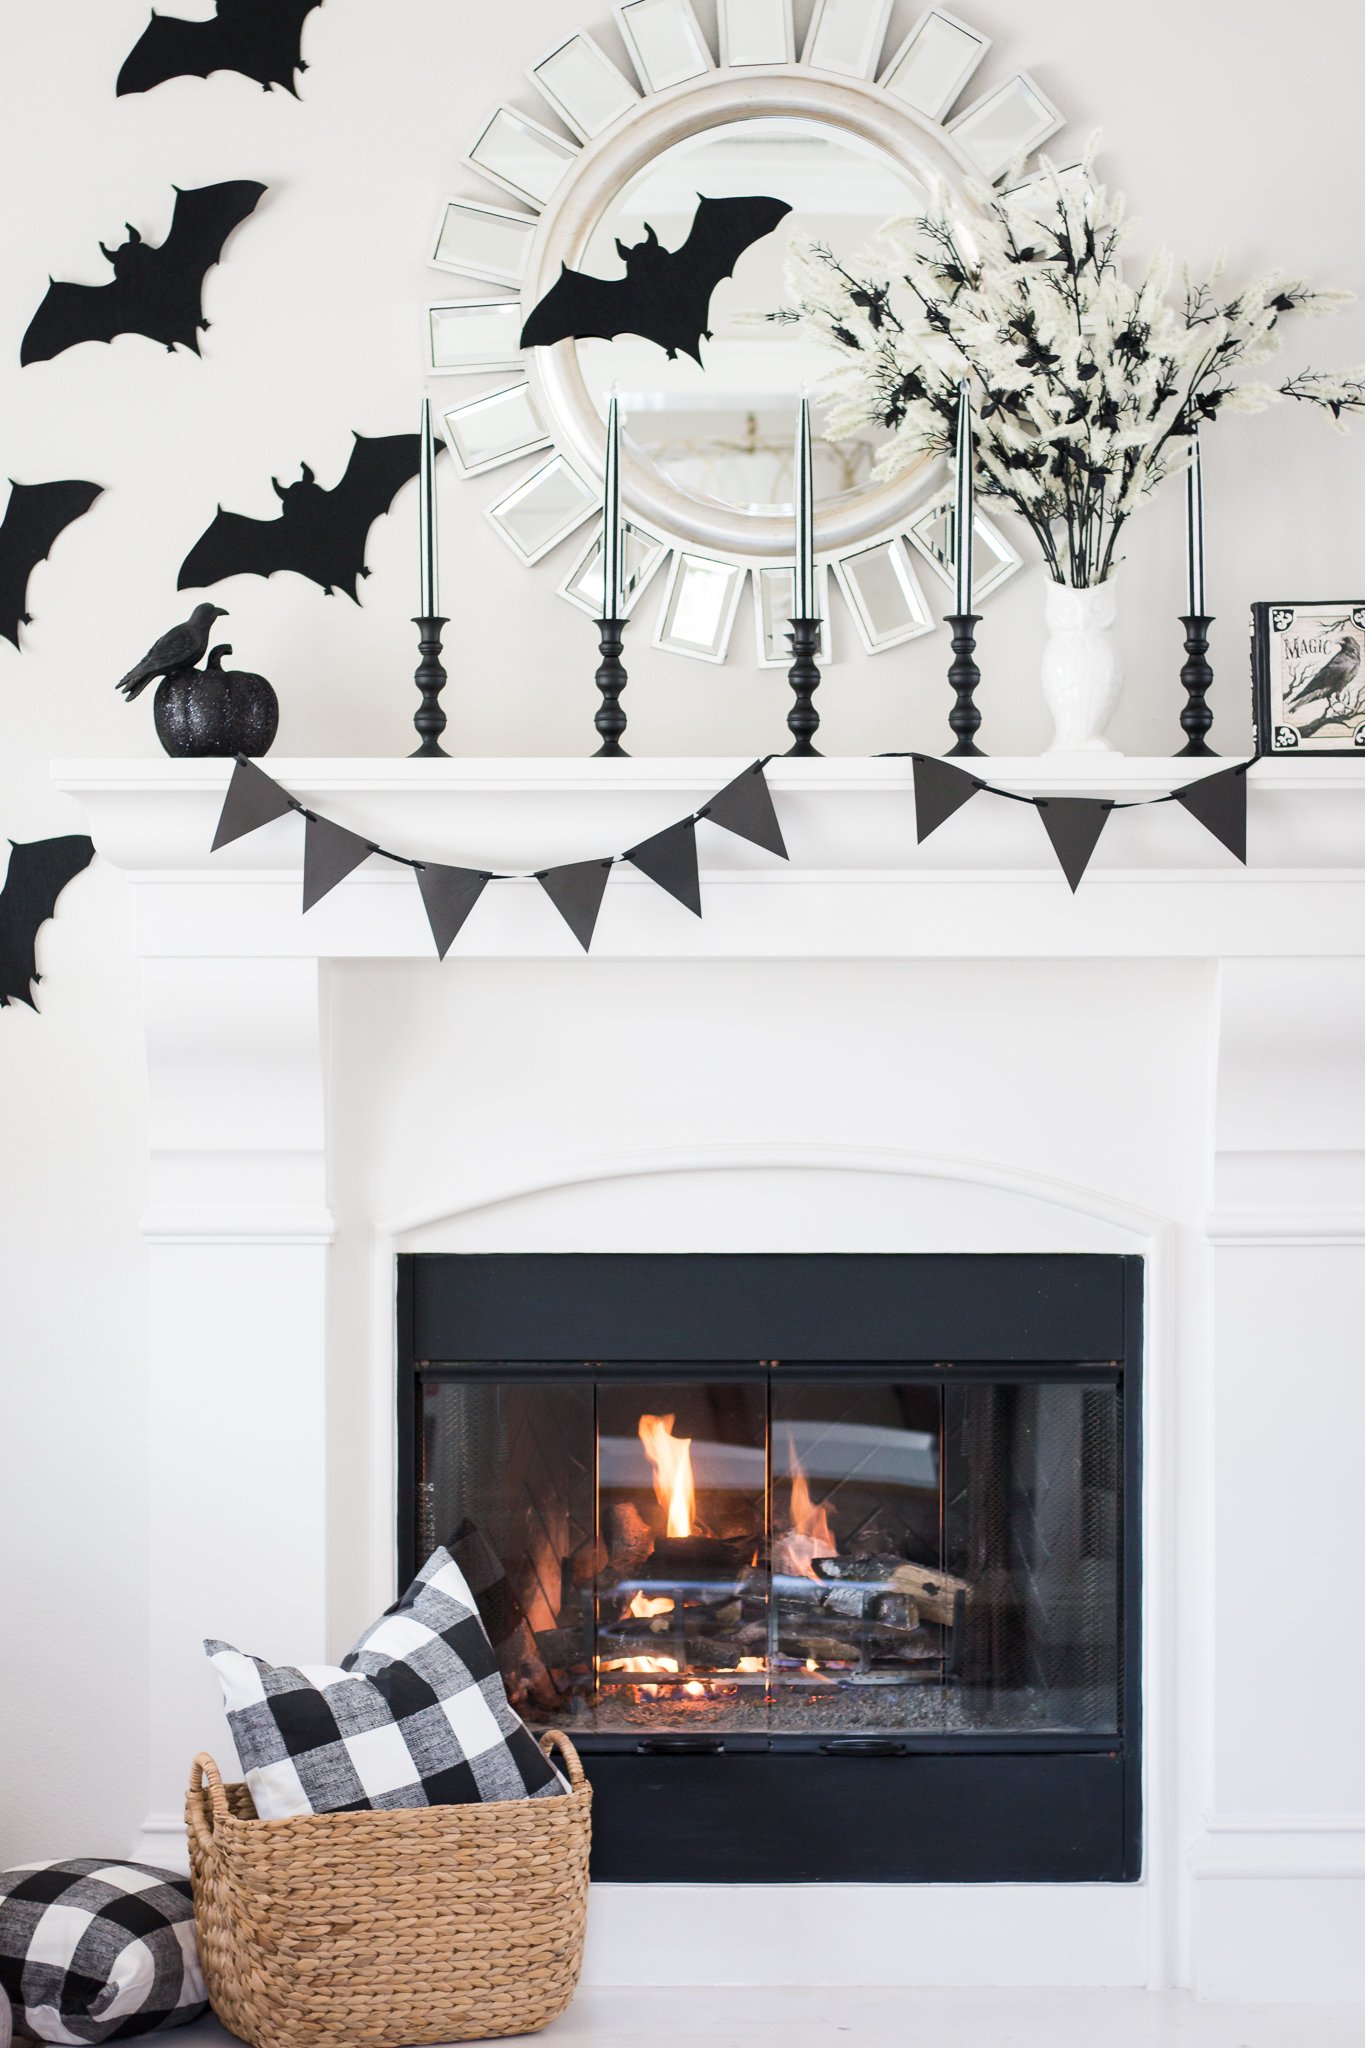 Black & White Halloween Mantel - A Thoughtful Place